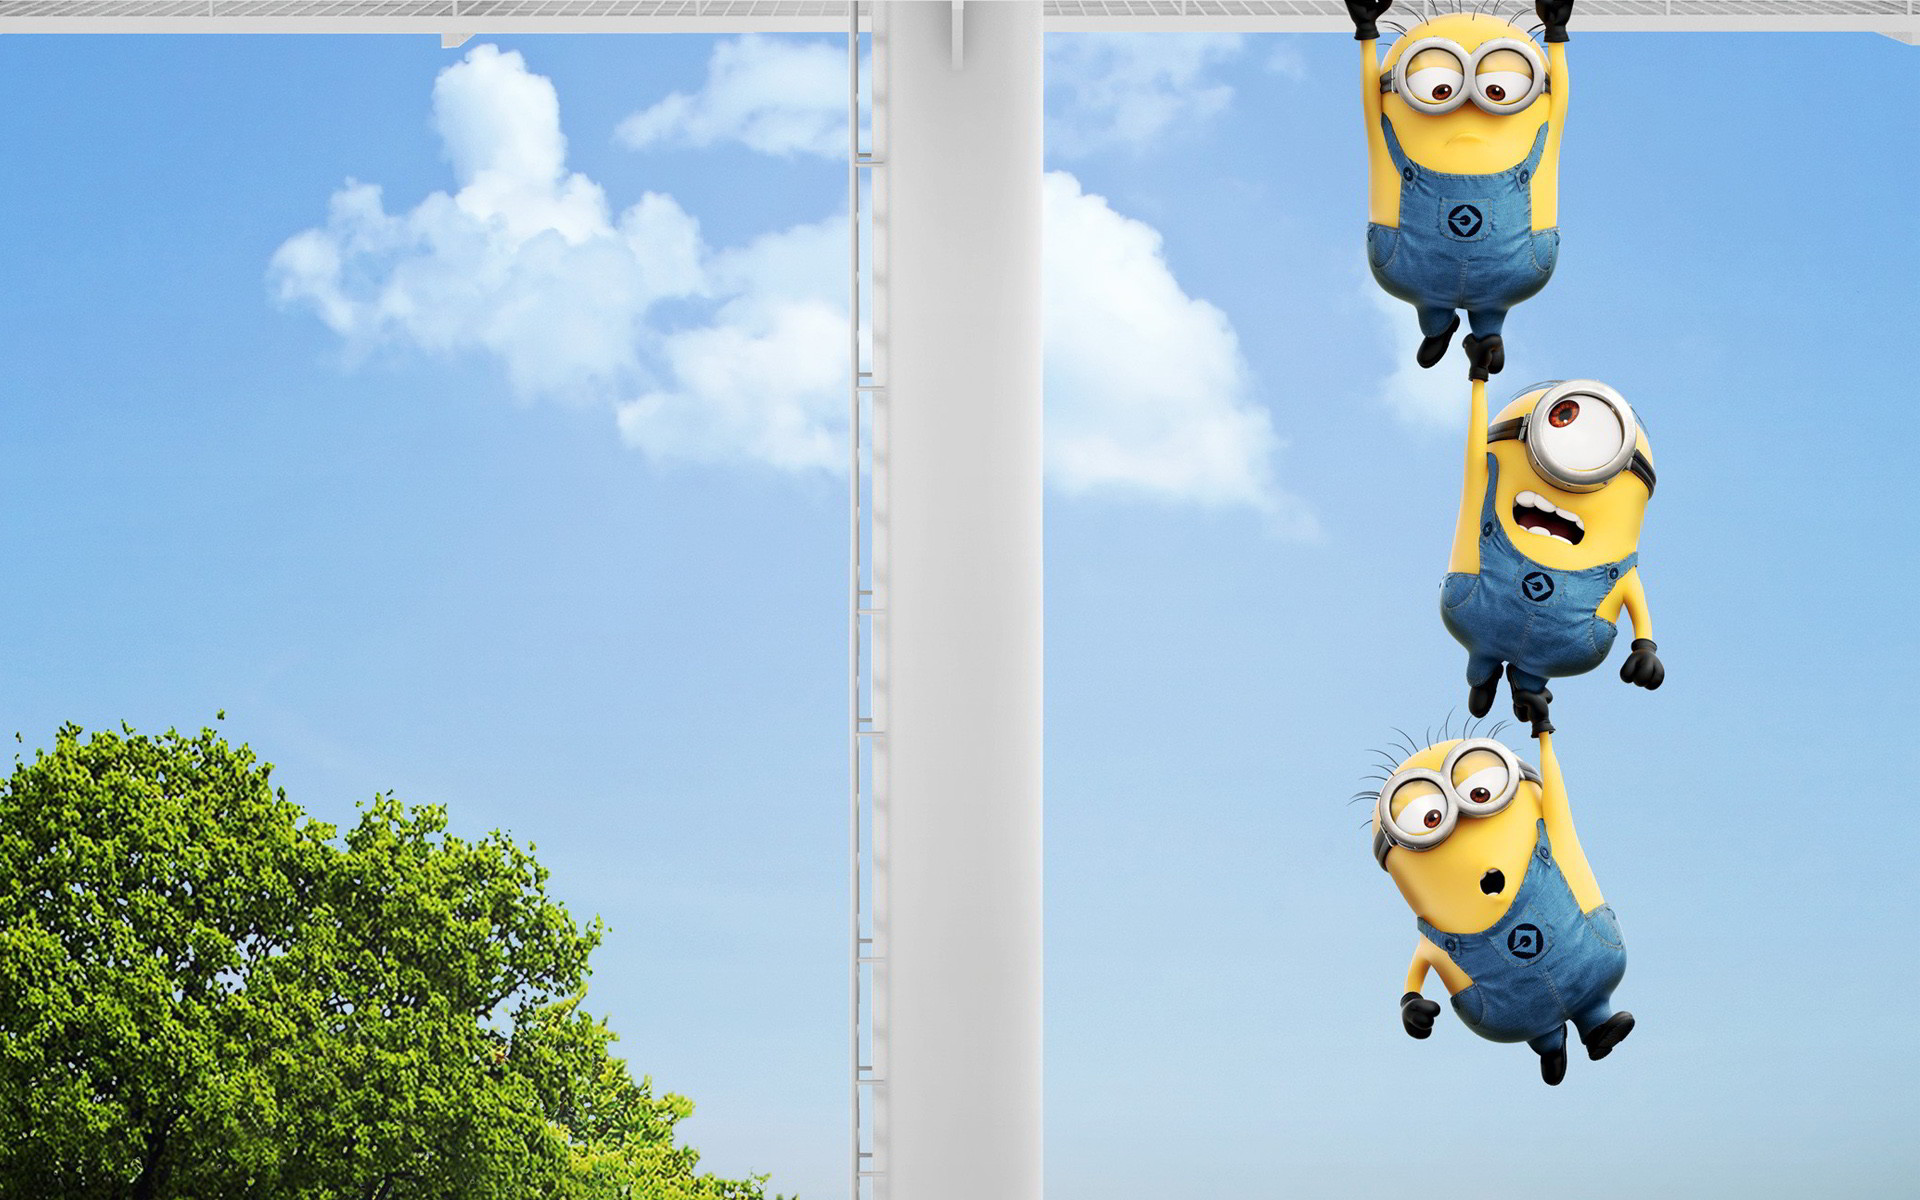 1920x1200 Minions Wallpapers HD Wallpapers Images Of Minions Wallpapers Wallpapers)